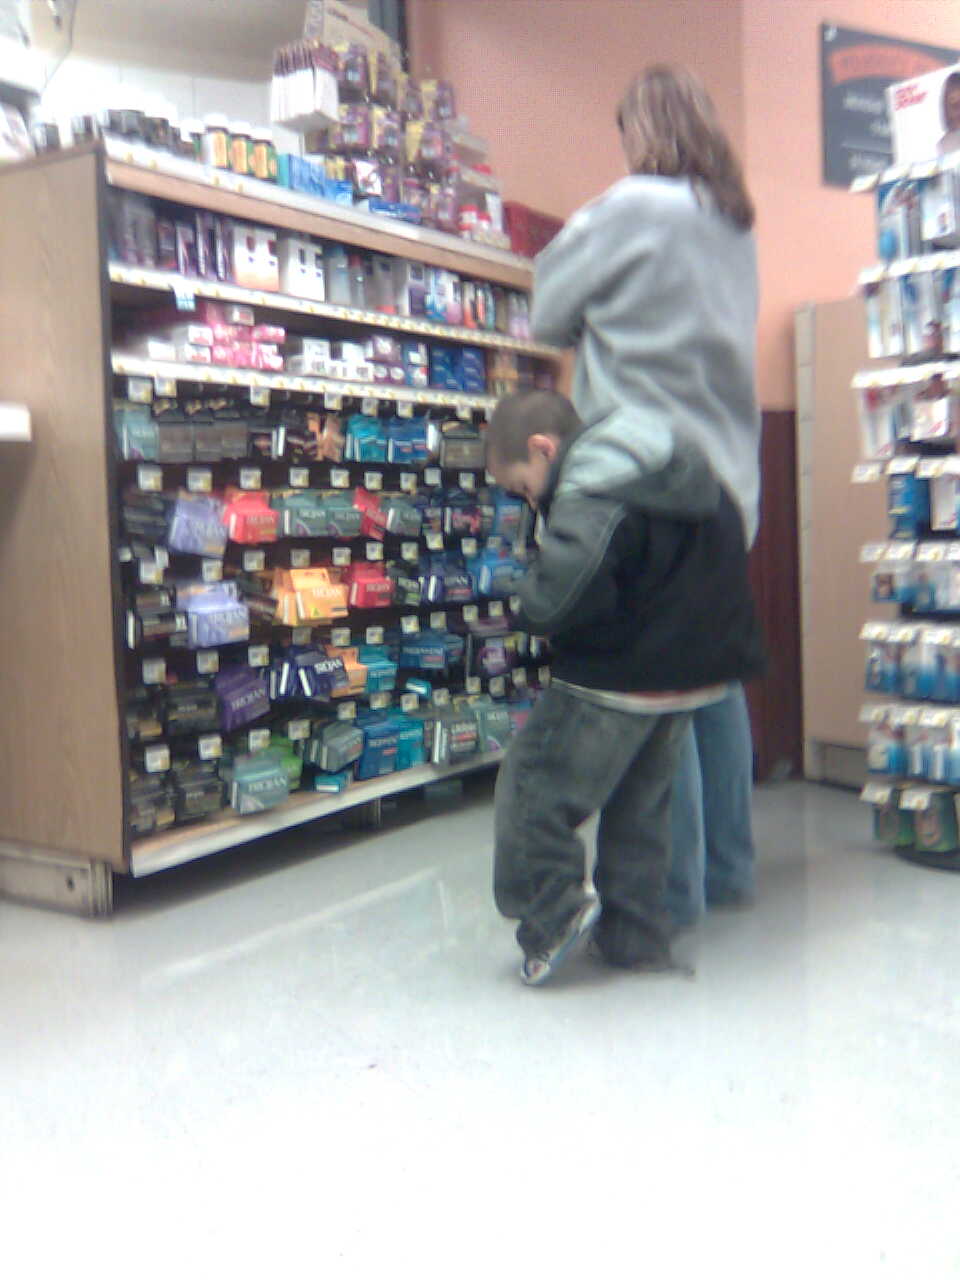 Mom takes her son condom shopping. I snapped a picture on my phone. Bad Parenting Award goes to this lady.
